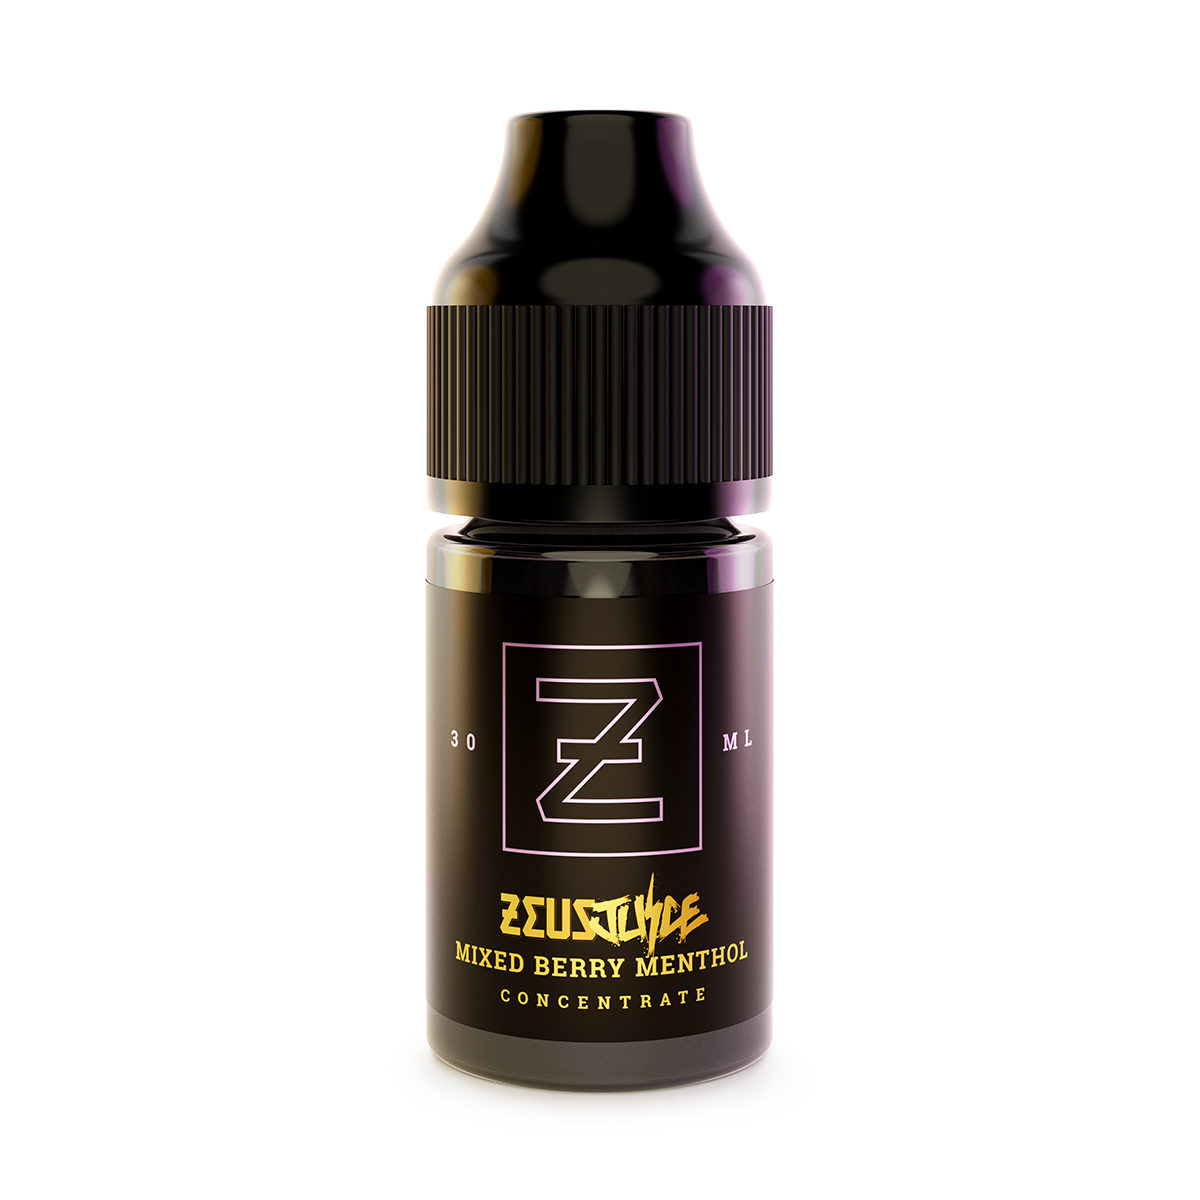 Mixed Berry Menthol Flavour Concentrate by Zeus Juice